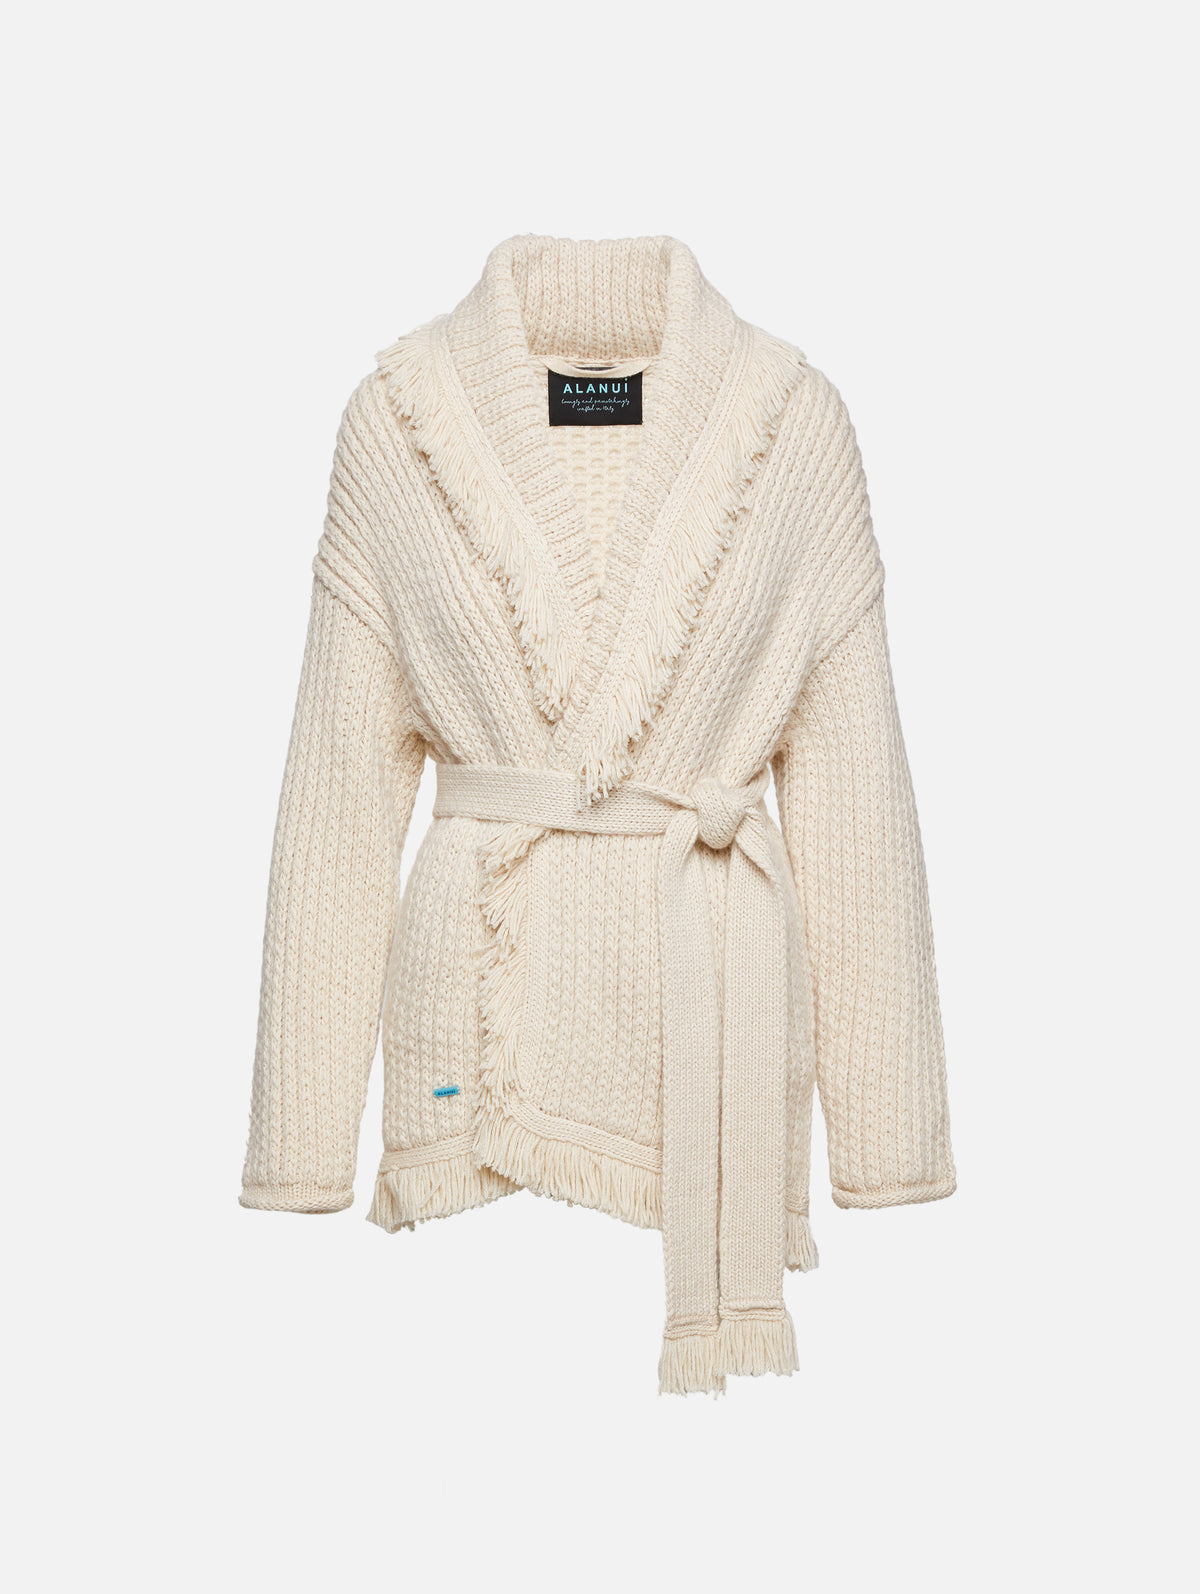 view 1 - "A" Finest Knit Cardigan